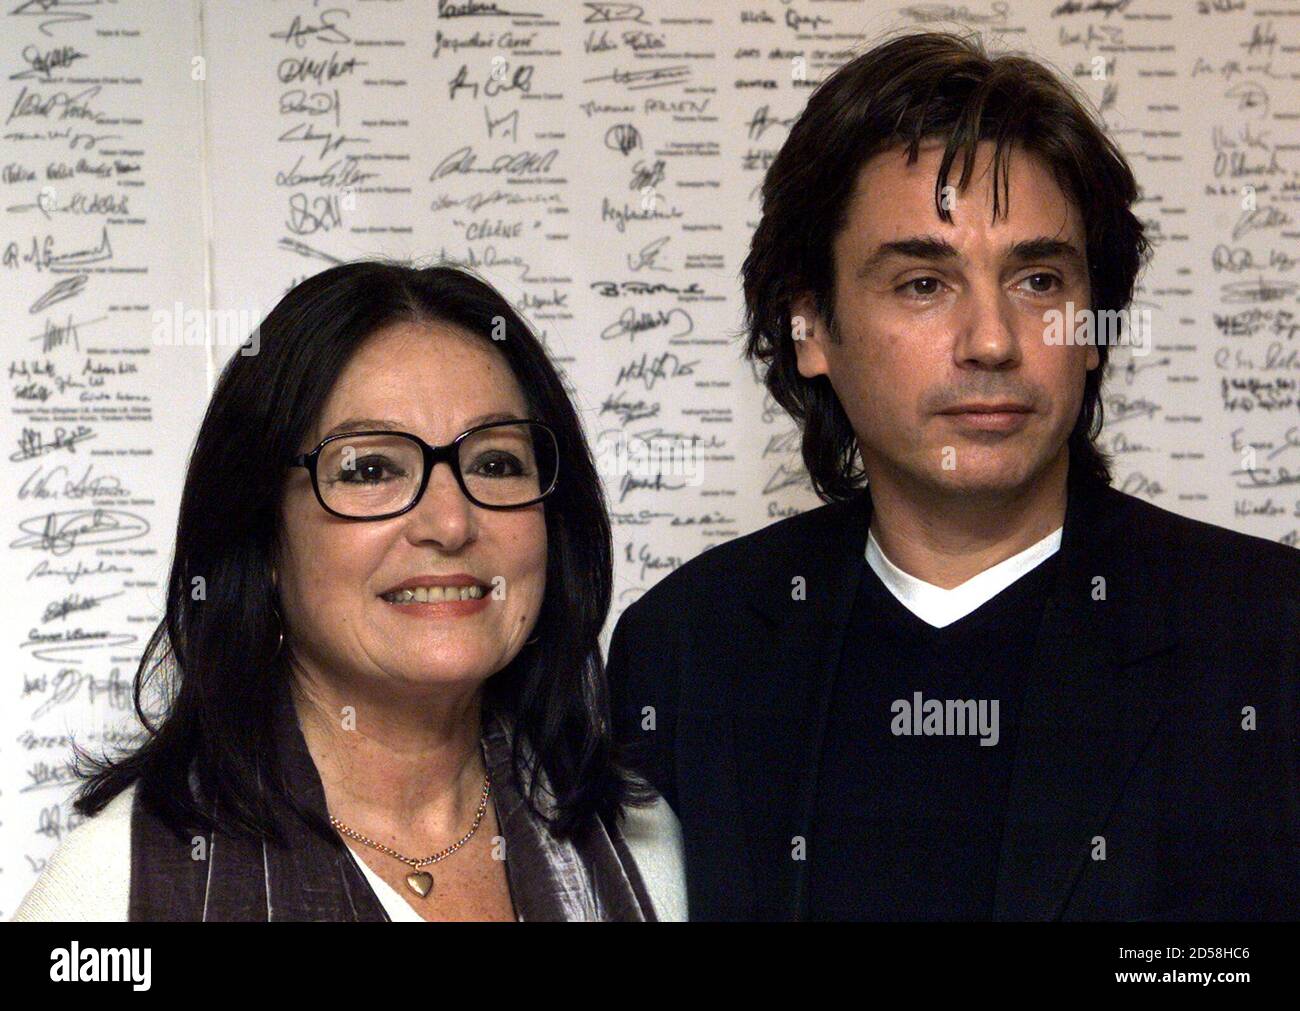 French artist Jean-Michel Jarre (R) and Member of the European Parliament  Nana Mouskouri (L) pose in front of a petition carrying the signatures of a  wide range of local, national and international